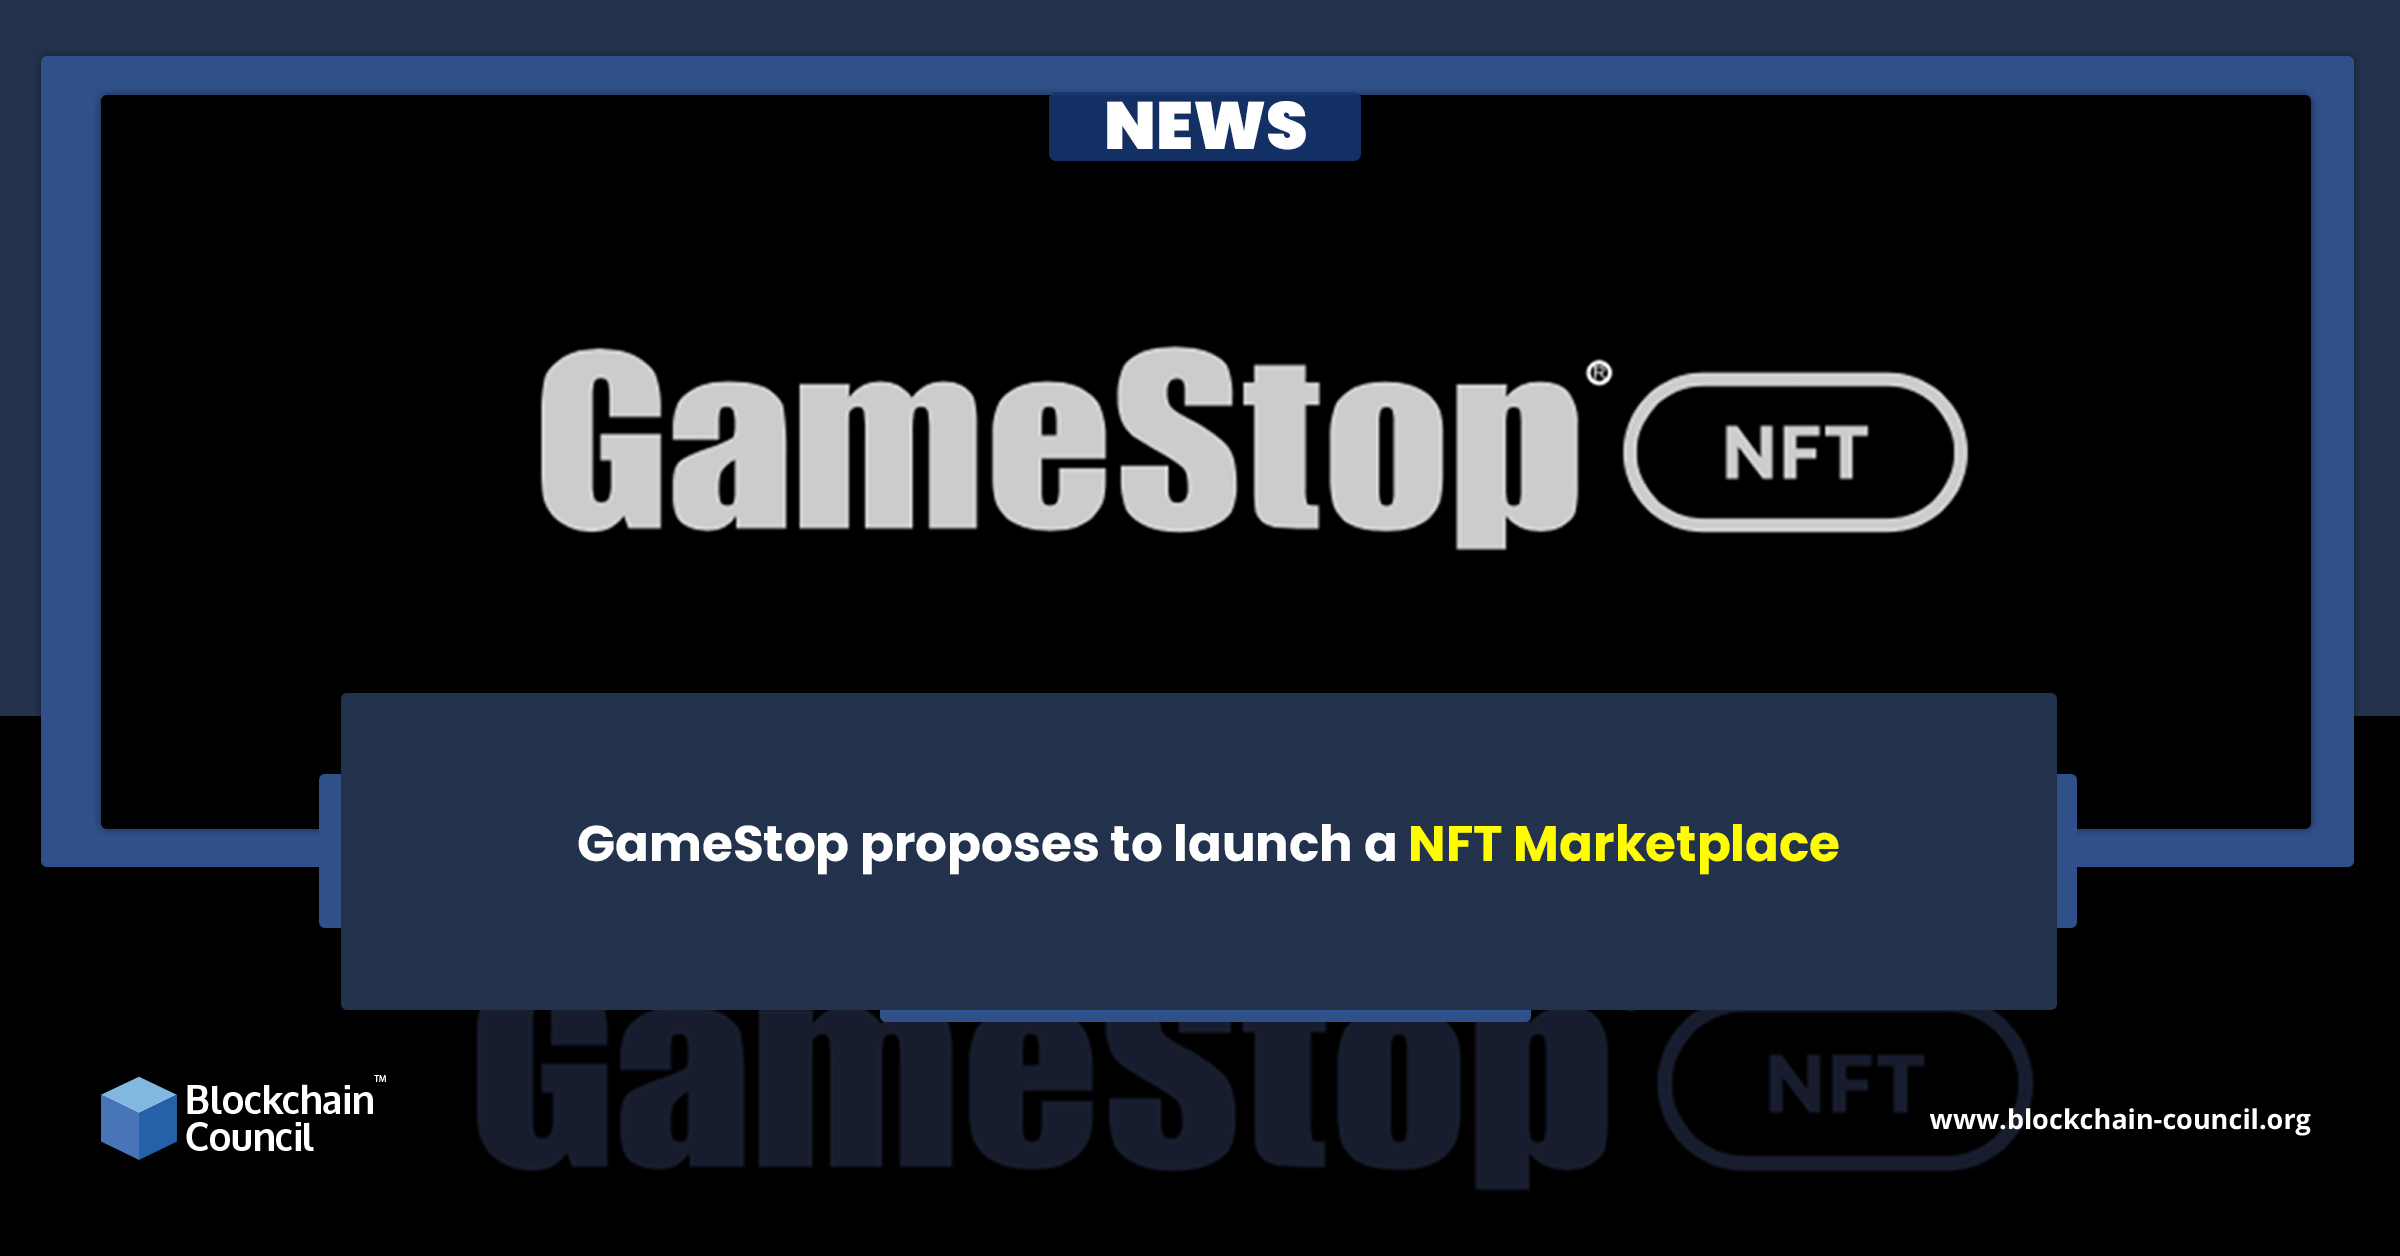 GameStop proposes to launch a NFT Marketplace news emailer